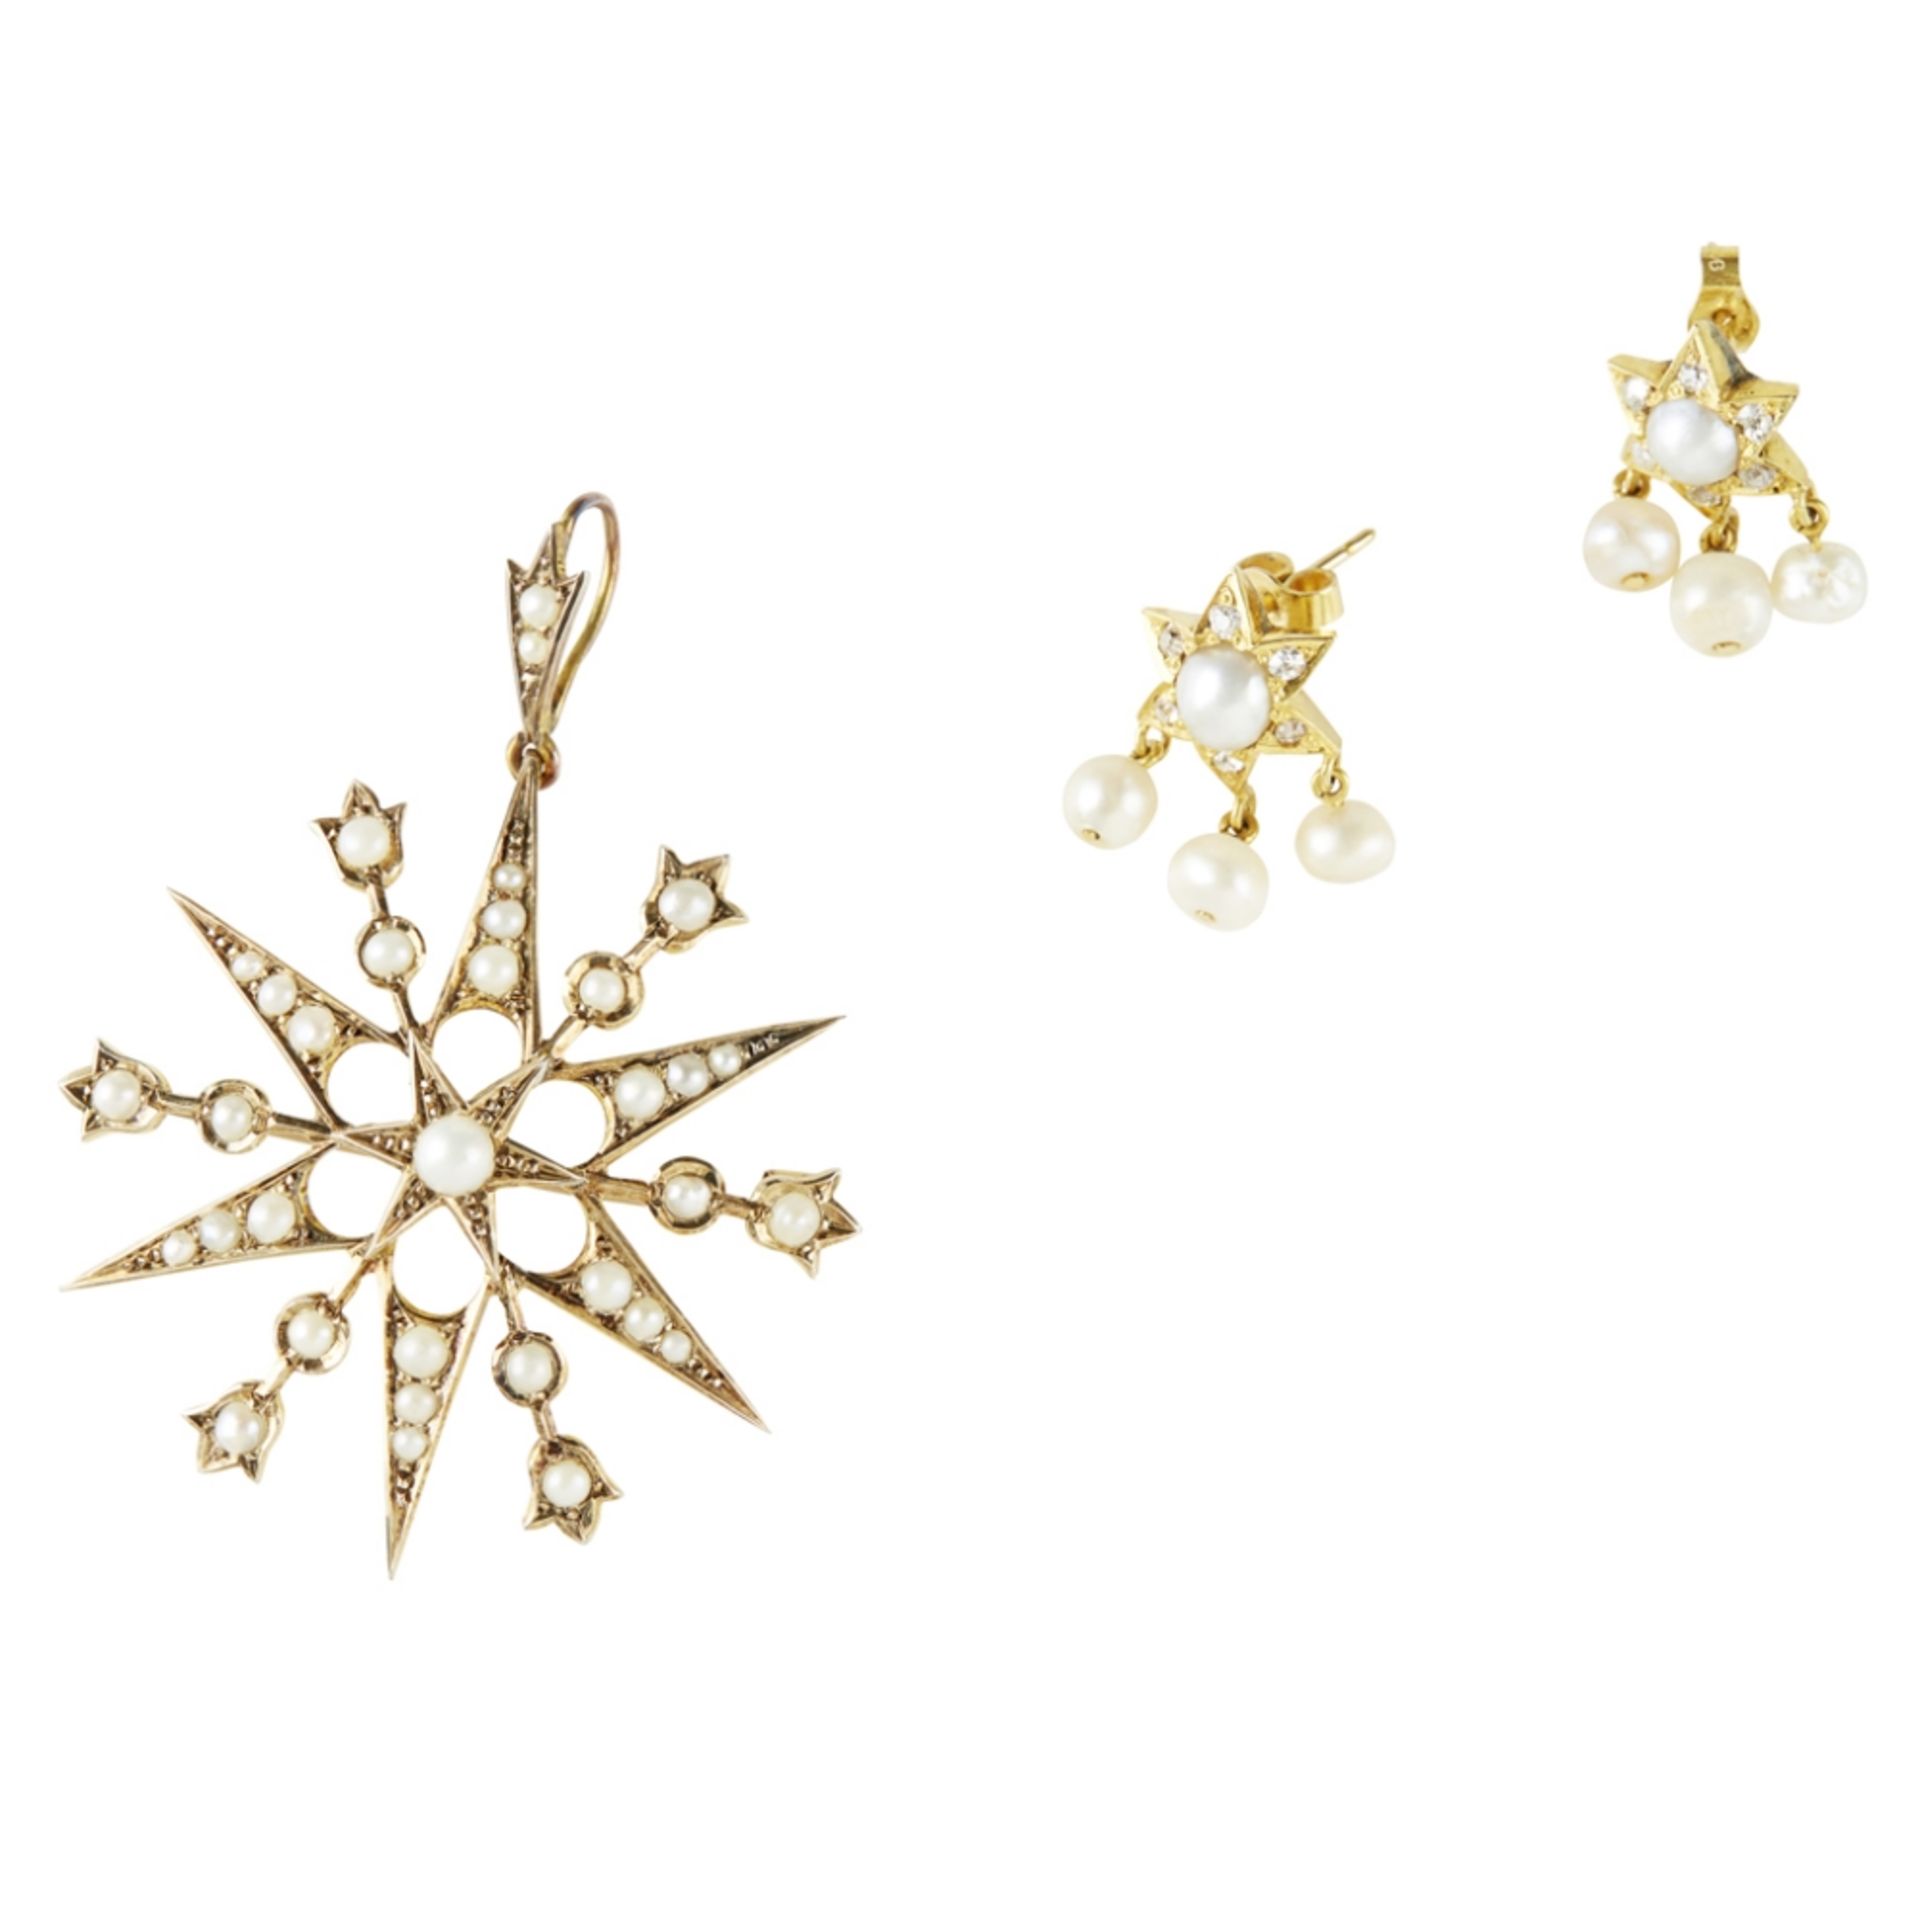 A Victorian seed pearl set brooch modelled as a star and set throughout with graduated half